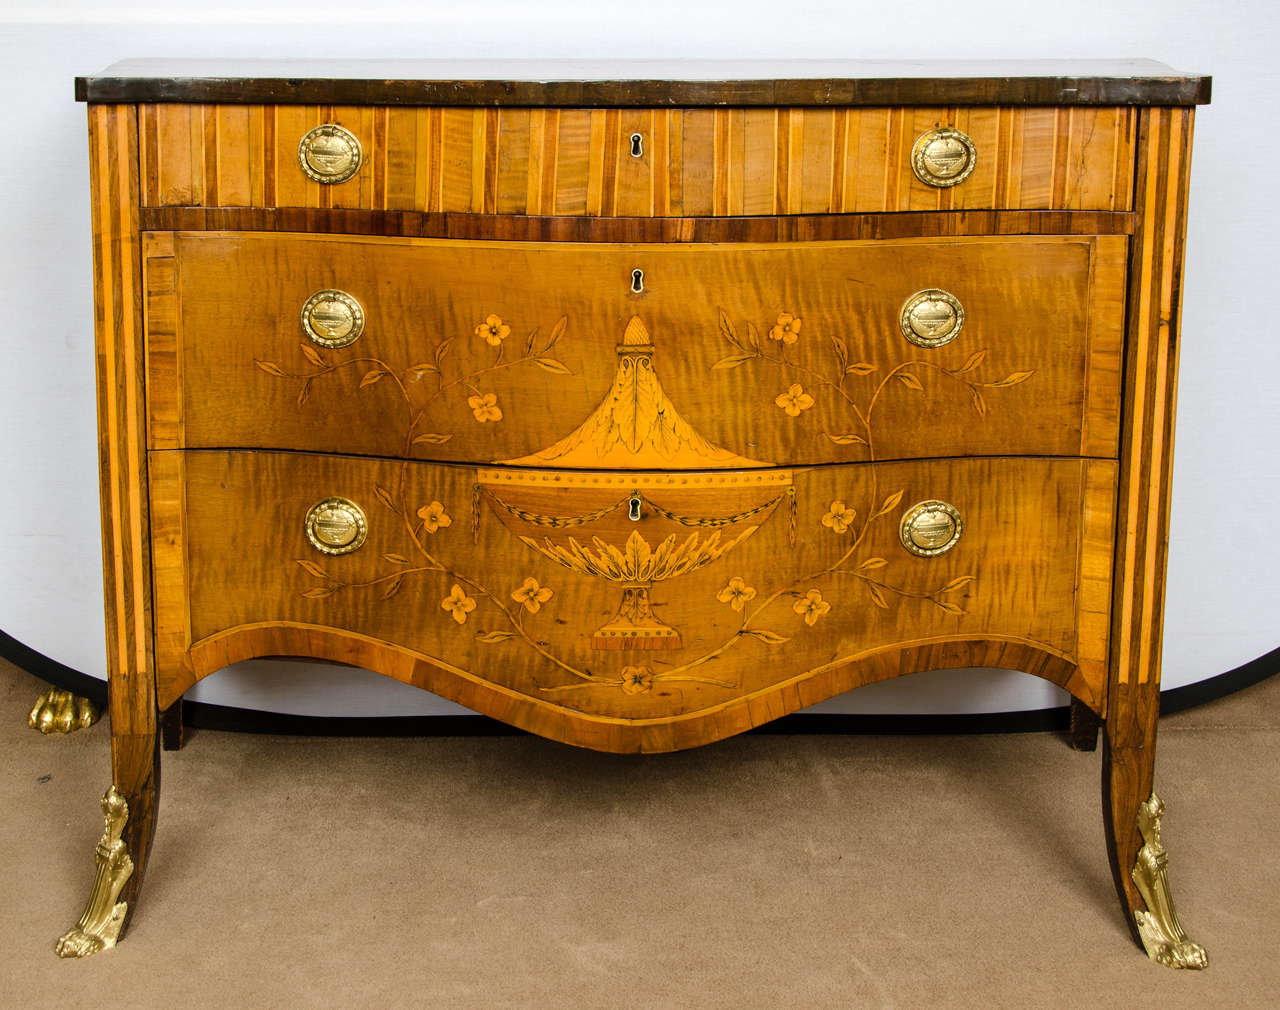 A fine George III marquetry commode, the top is inlaid with a central ribbon-tied spray on rosewood ground and engraved garland flanked by further sprays; all surrounded by stringing and cross banding, a frieze drawer above with two long drawers